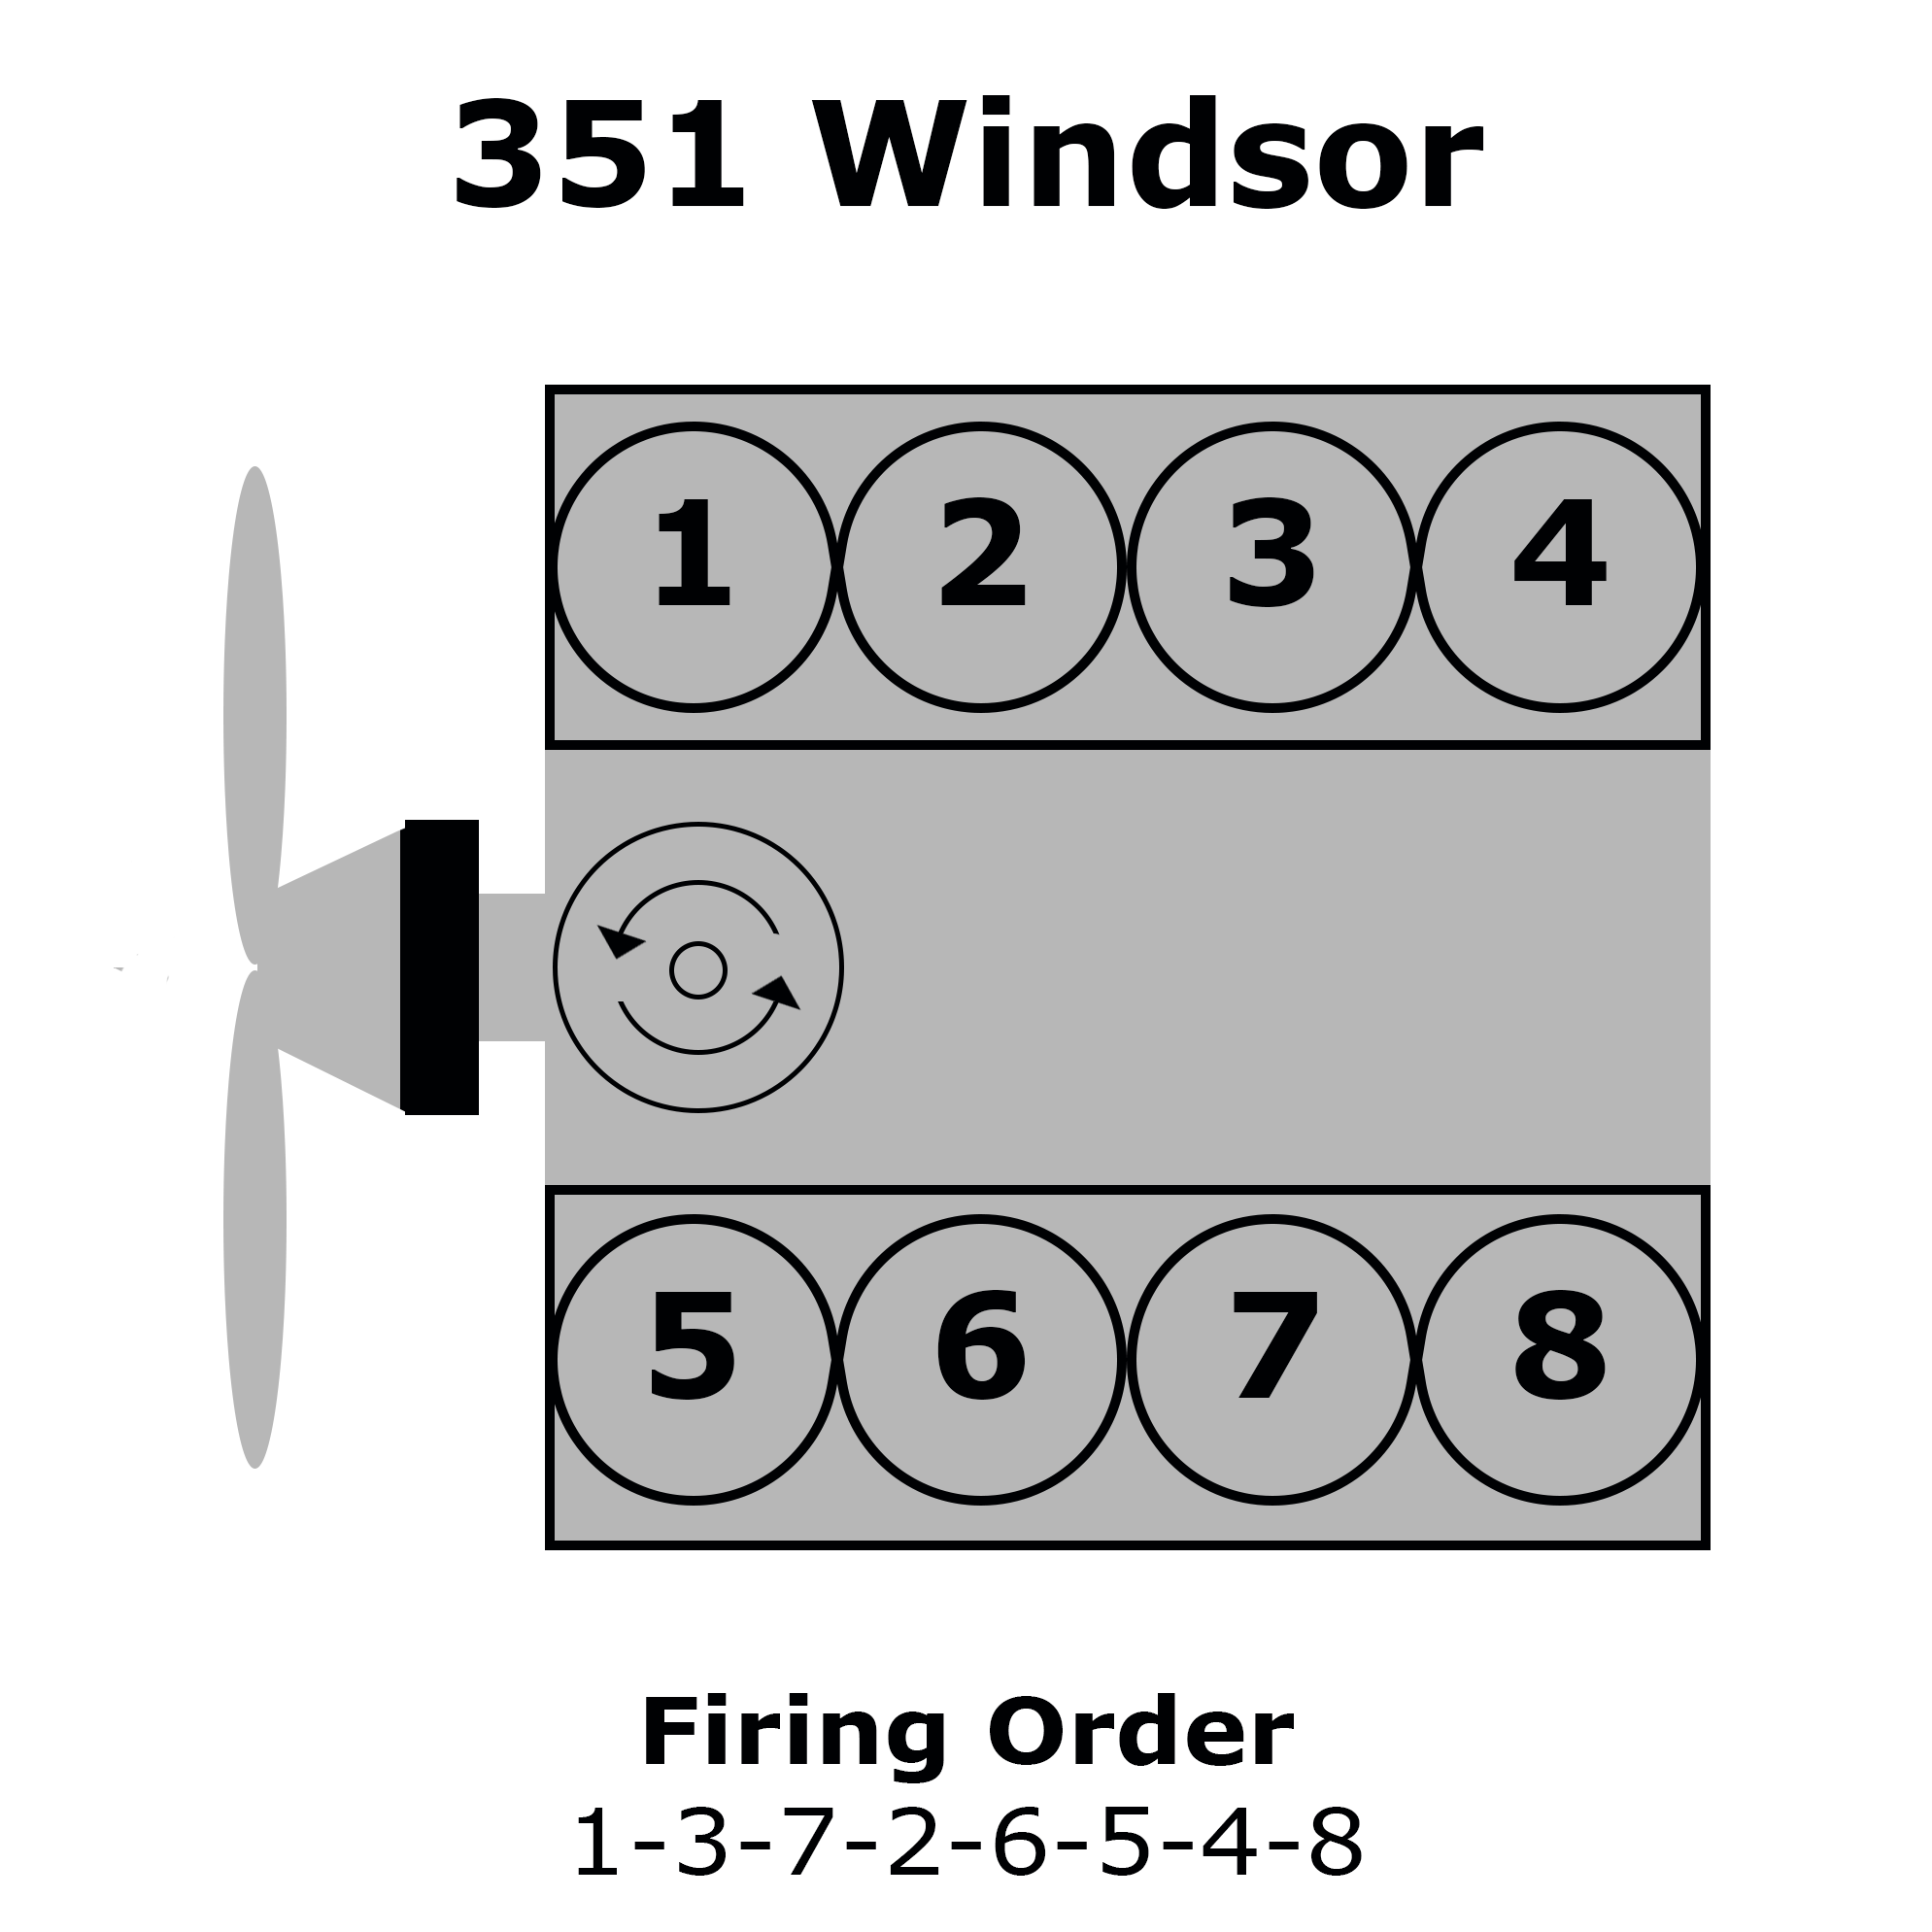 Ford Cylinder Numbers